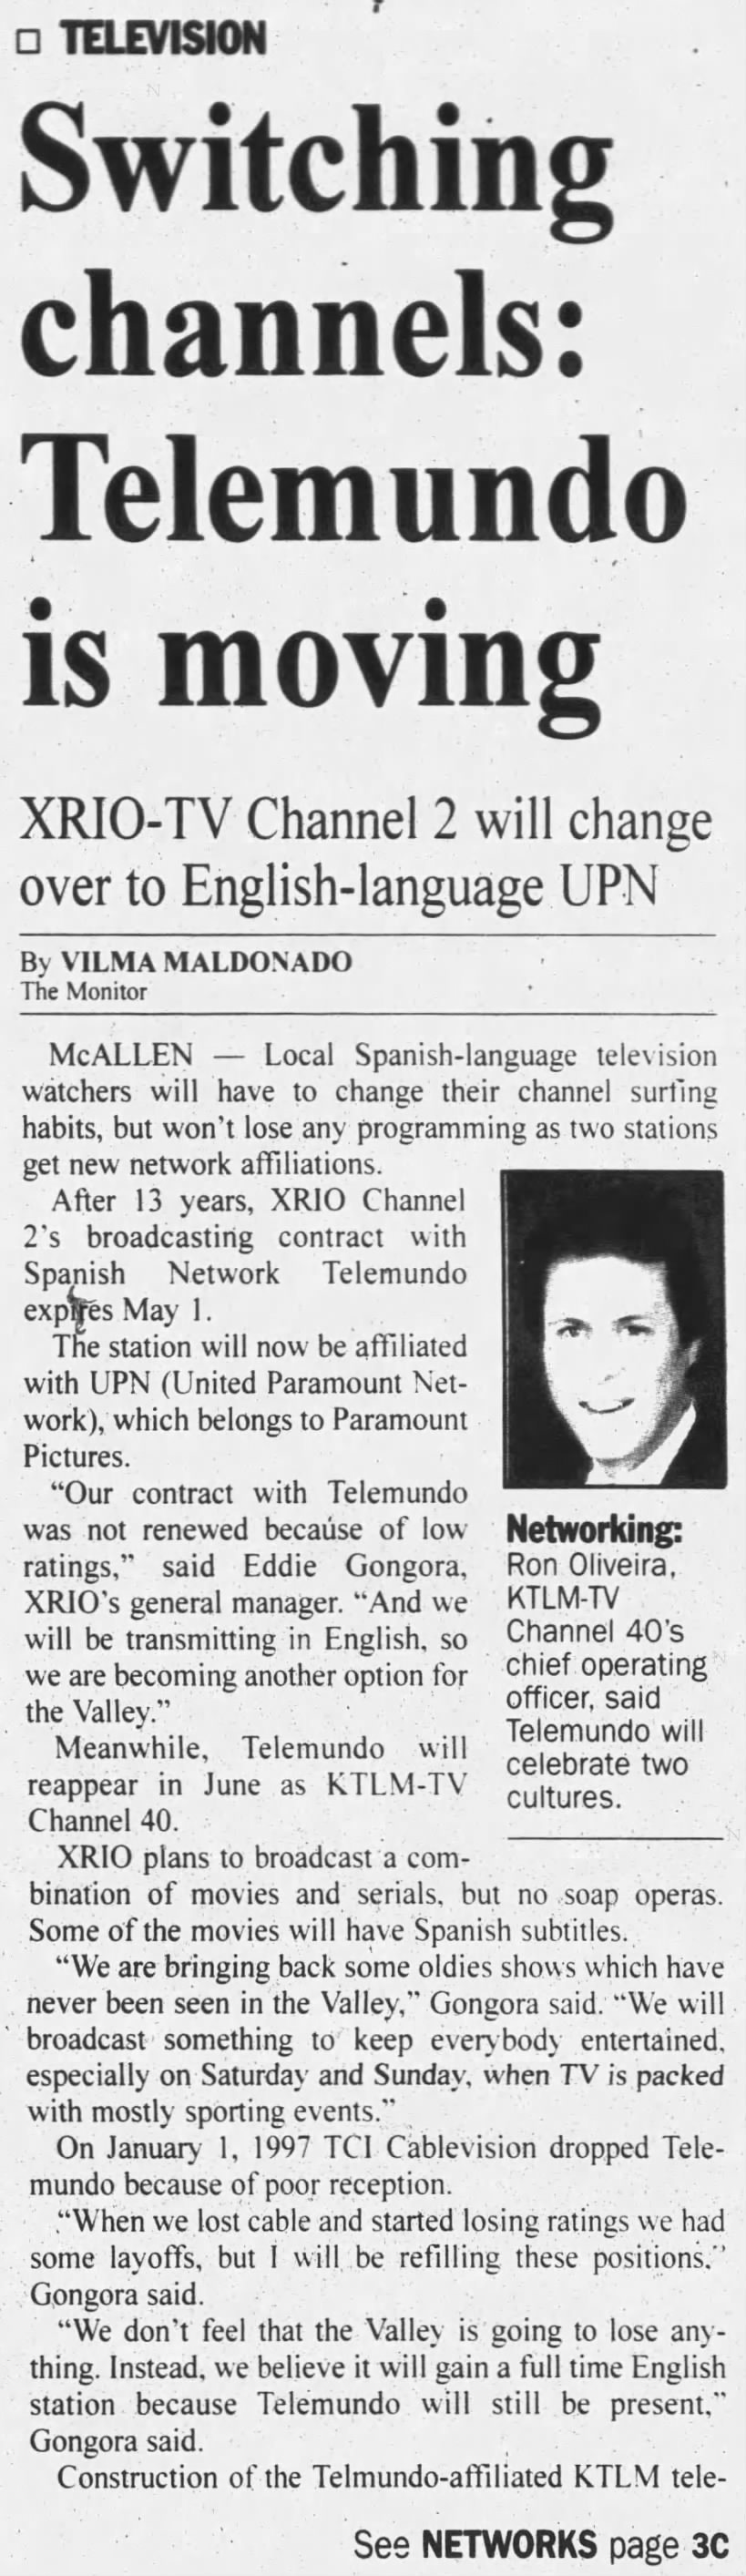 Switching channels: Telemundo is moving